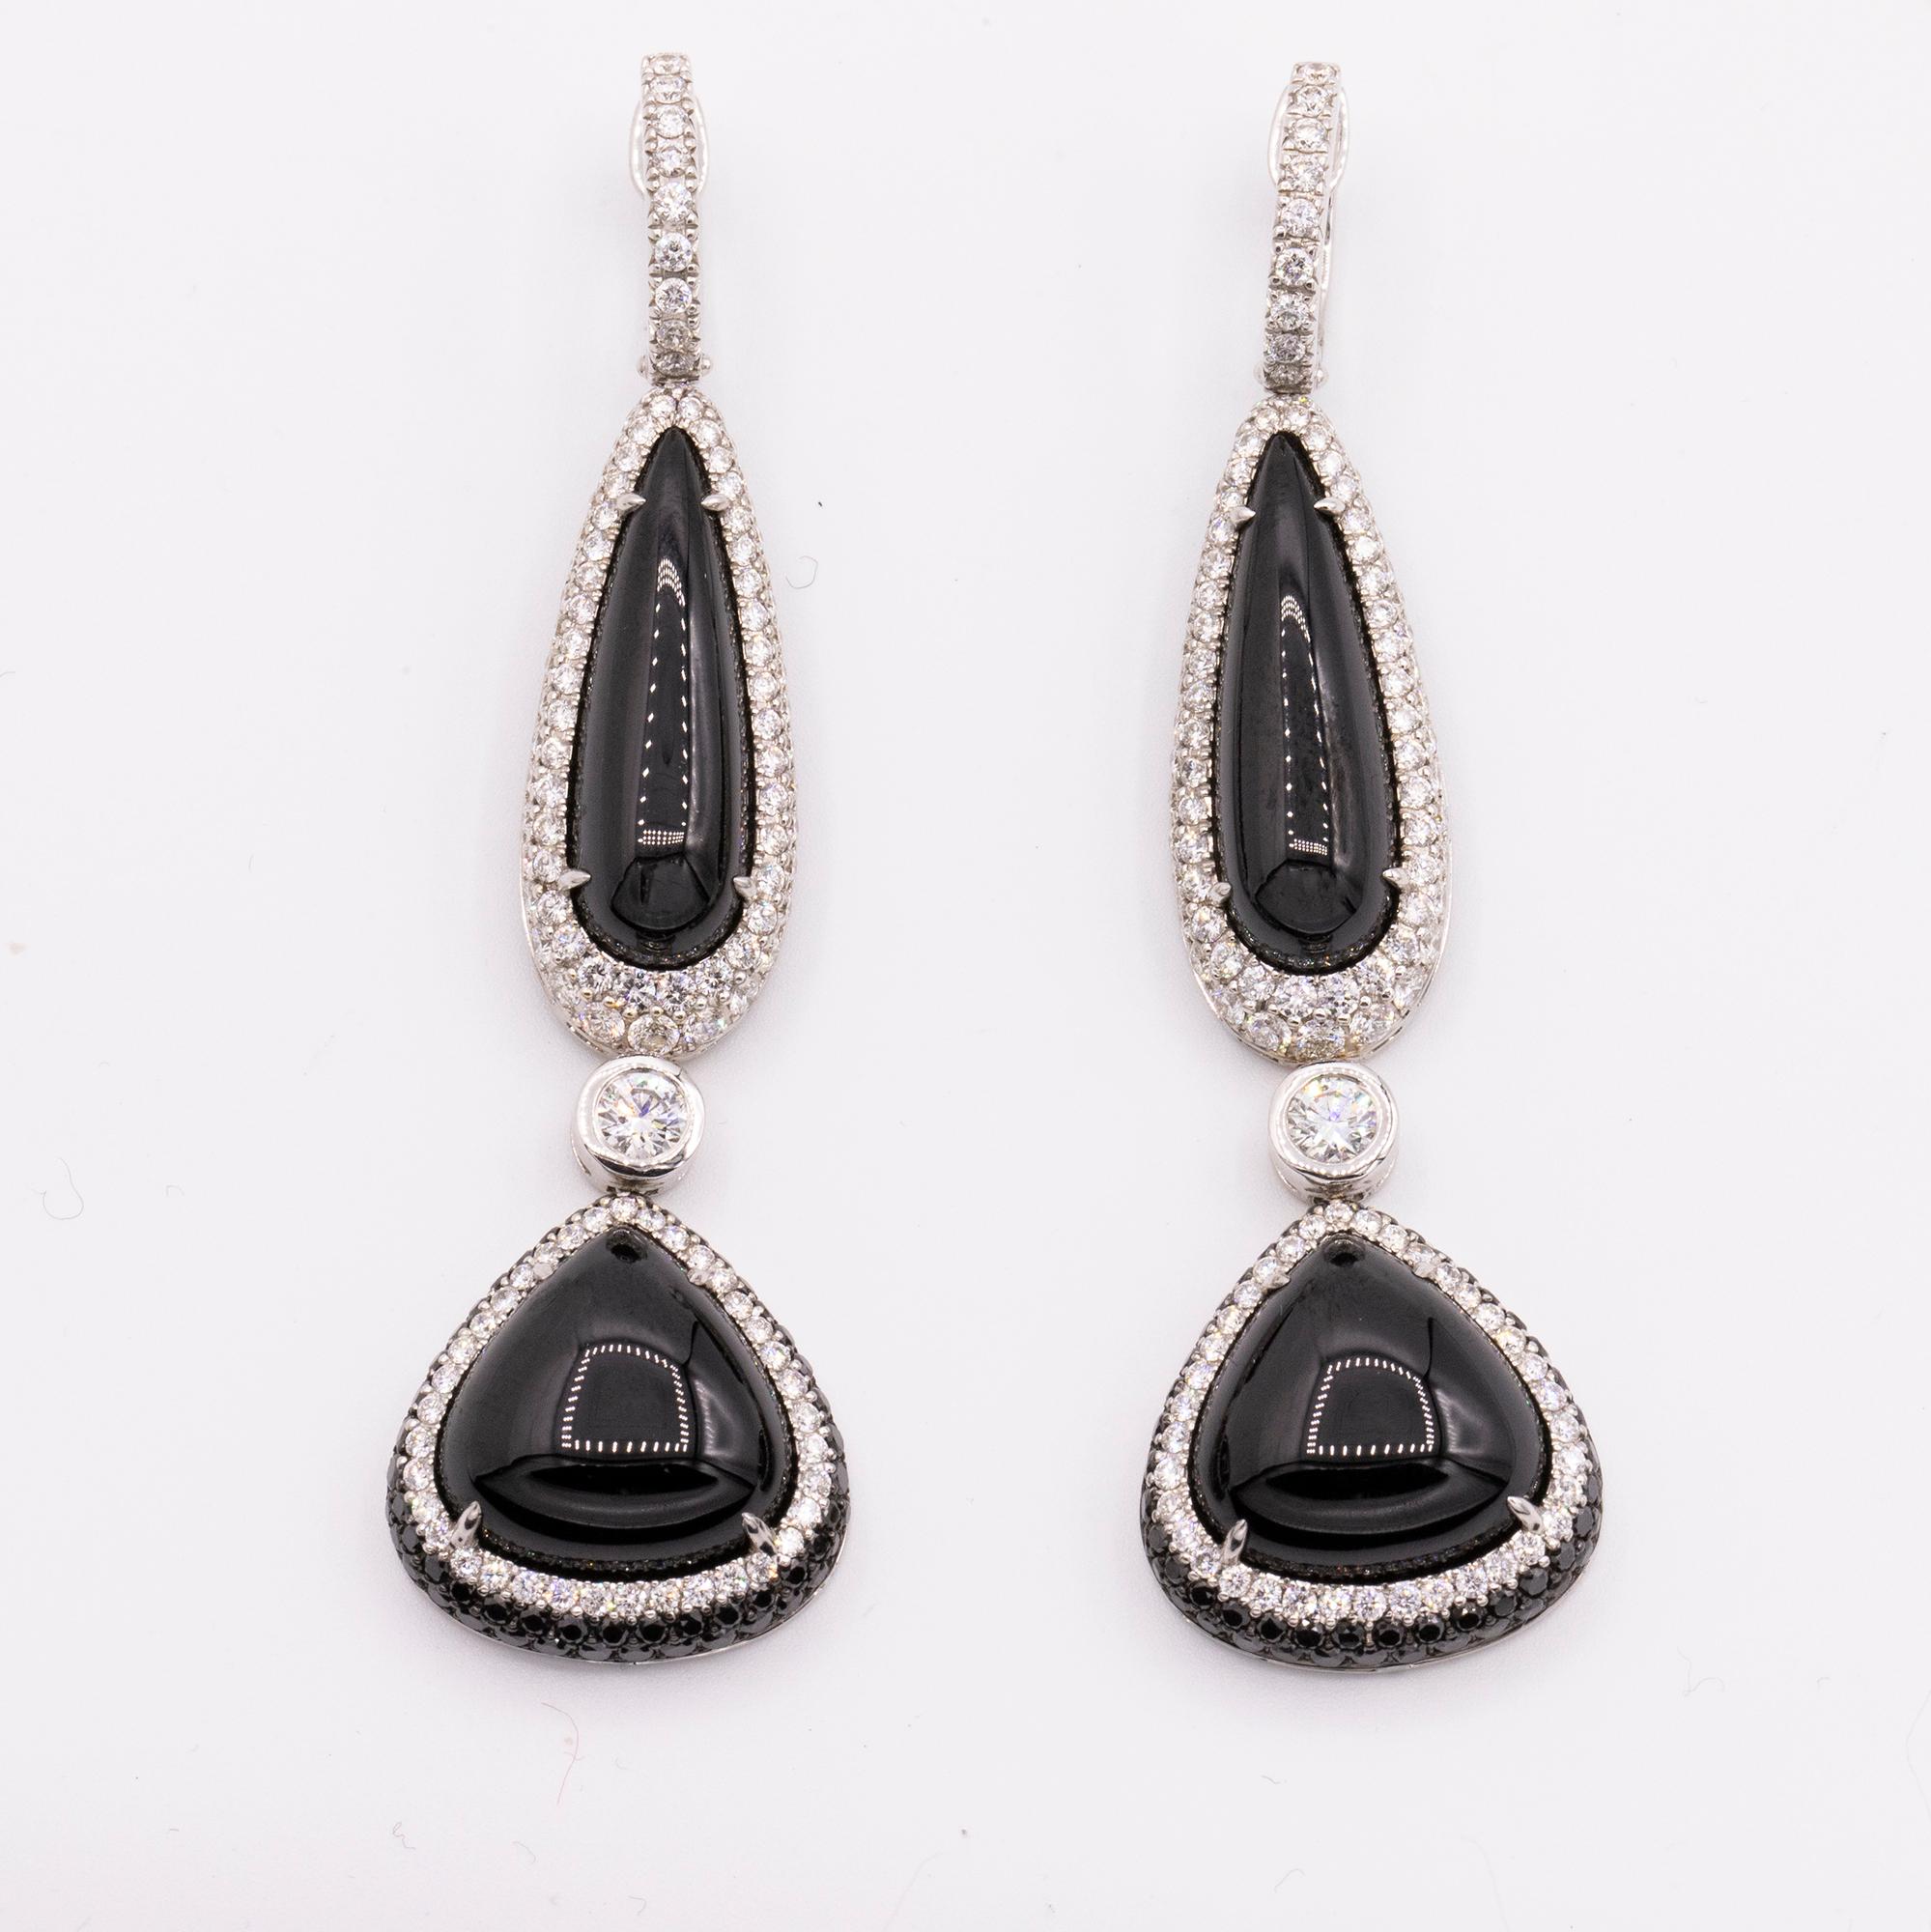 From Hamilton's Lisette Collection, handmade drop earrings with cabochon black spinels framed with white and black diamonds and set in 18k white gold.

black spinel = 52.07 carat total weight
2 larger diamonds, =.50 carat total weight
framed by